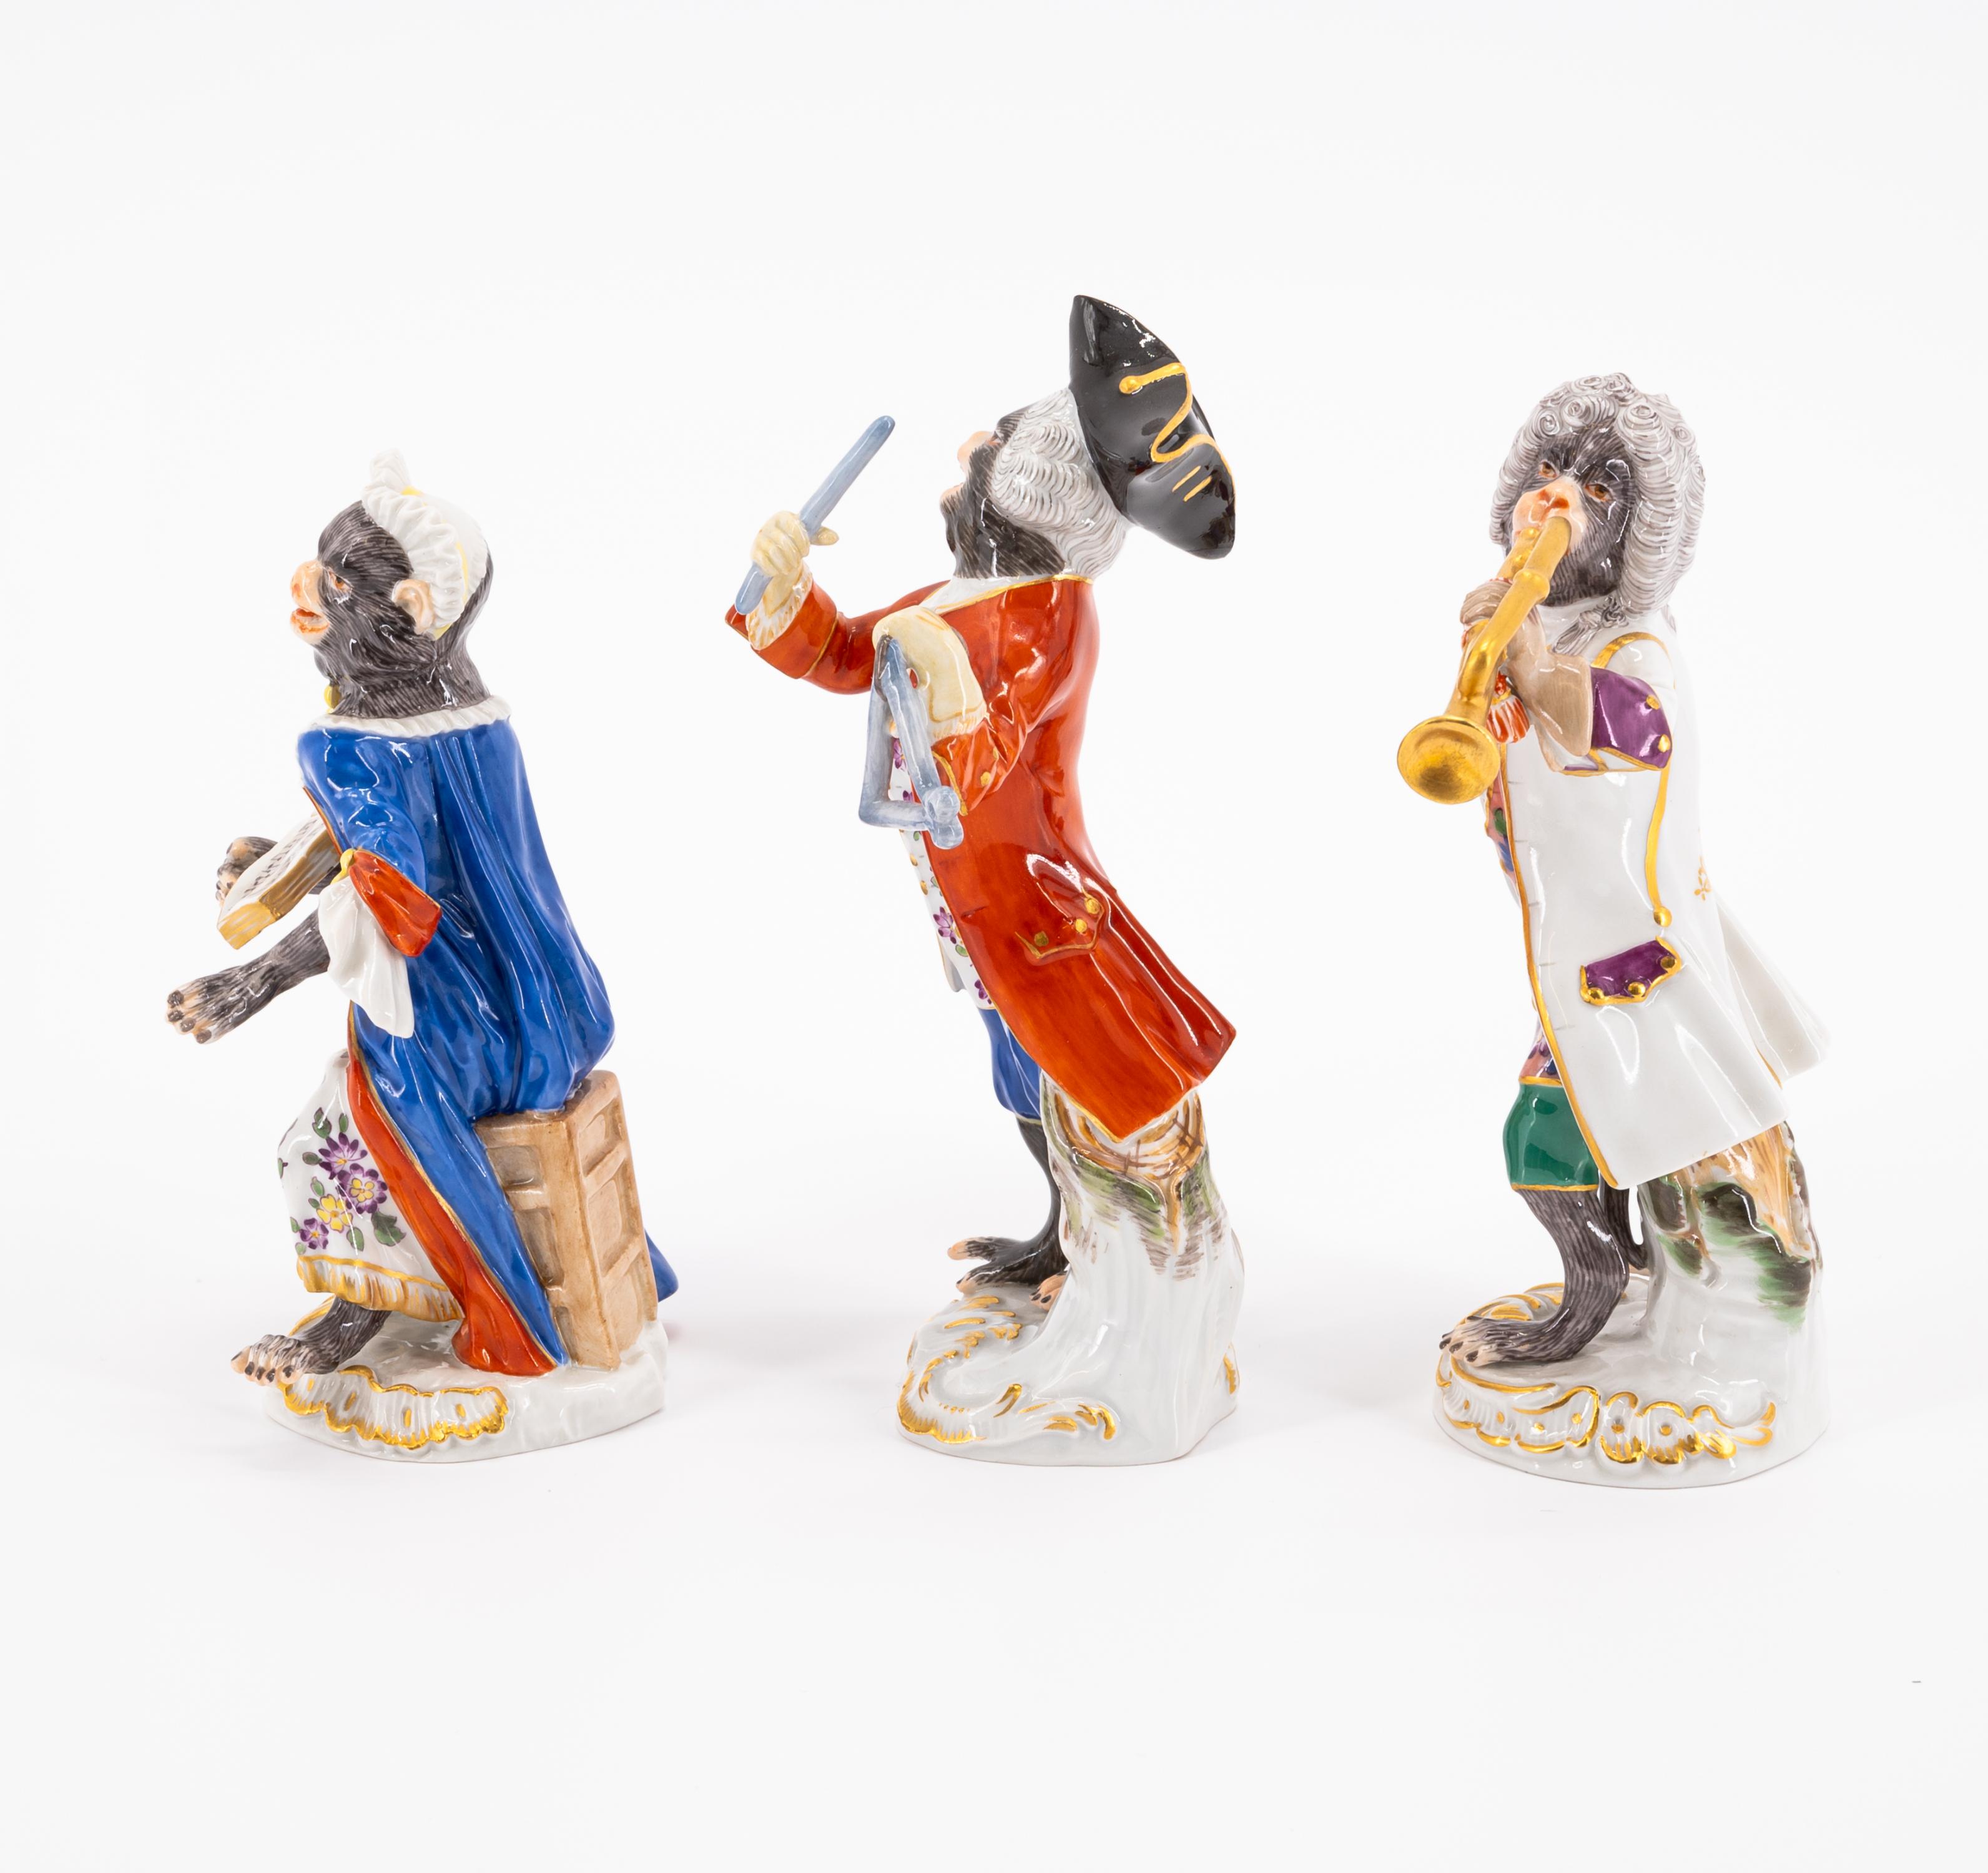 21 PORCELAIN FIGURES FROM THE MONKEY CHAPEL - Image 3 of 27